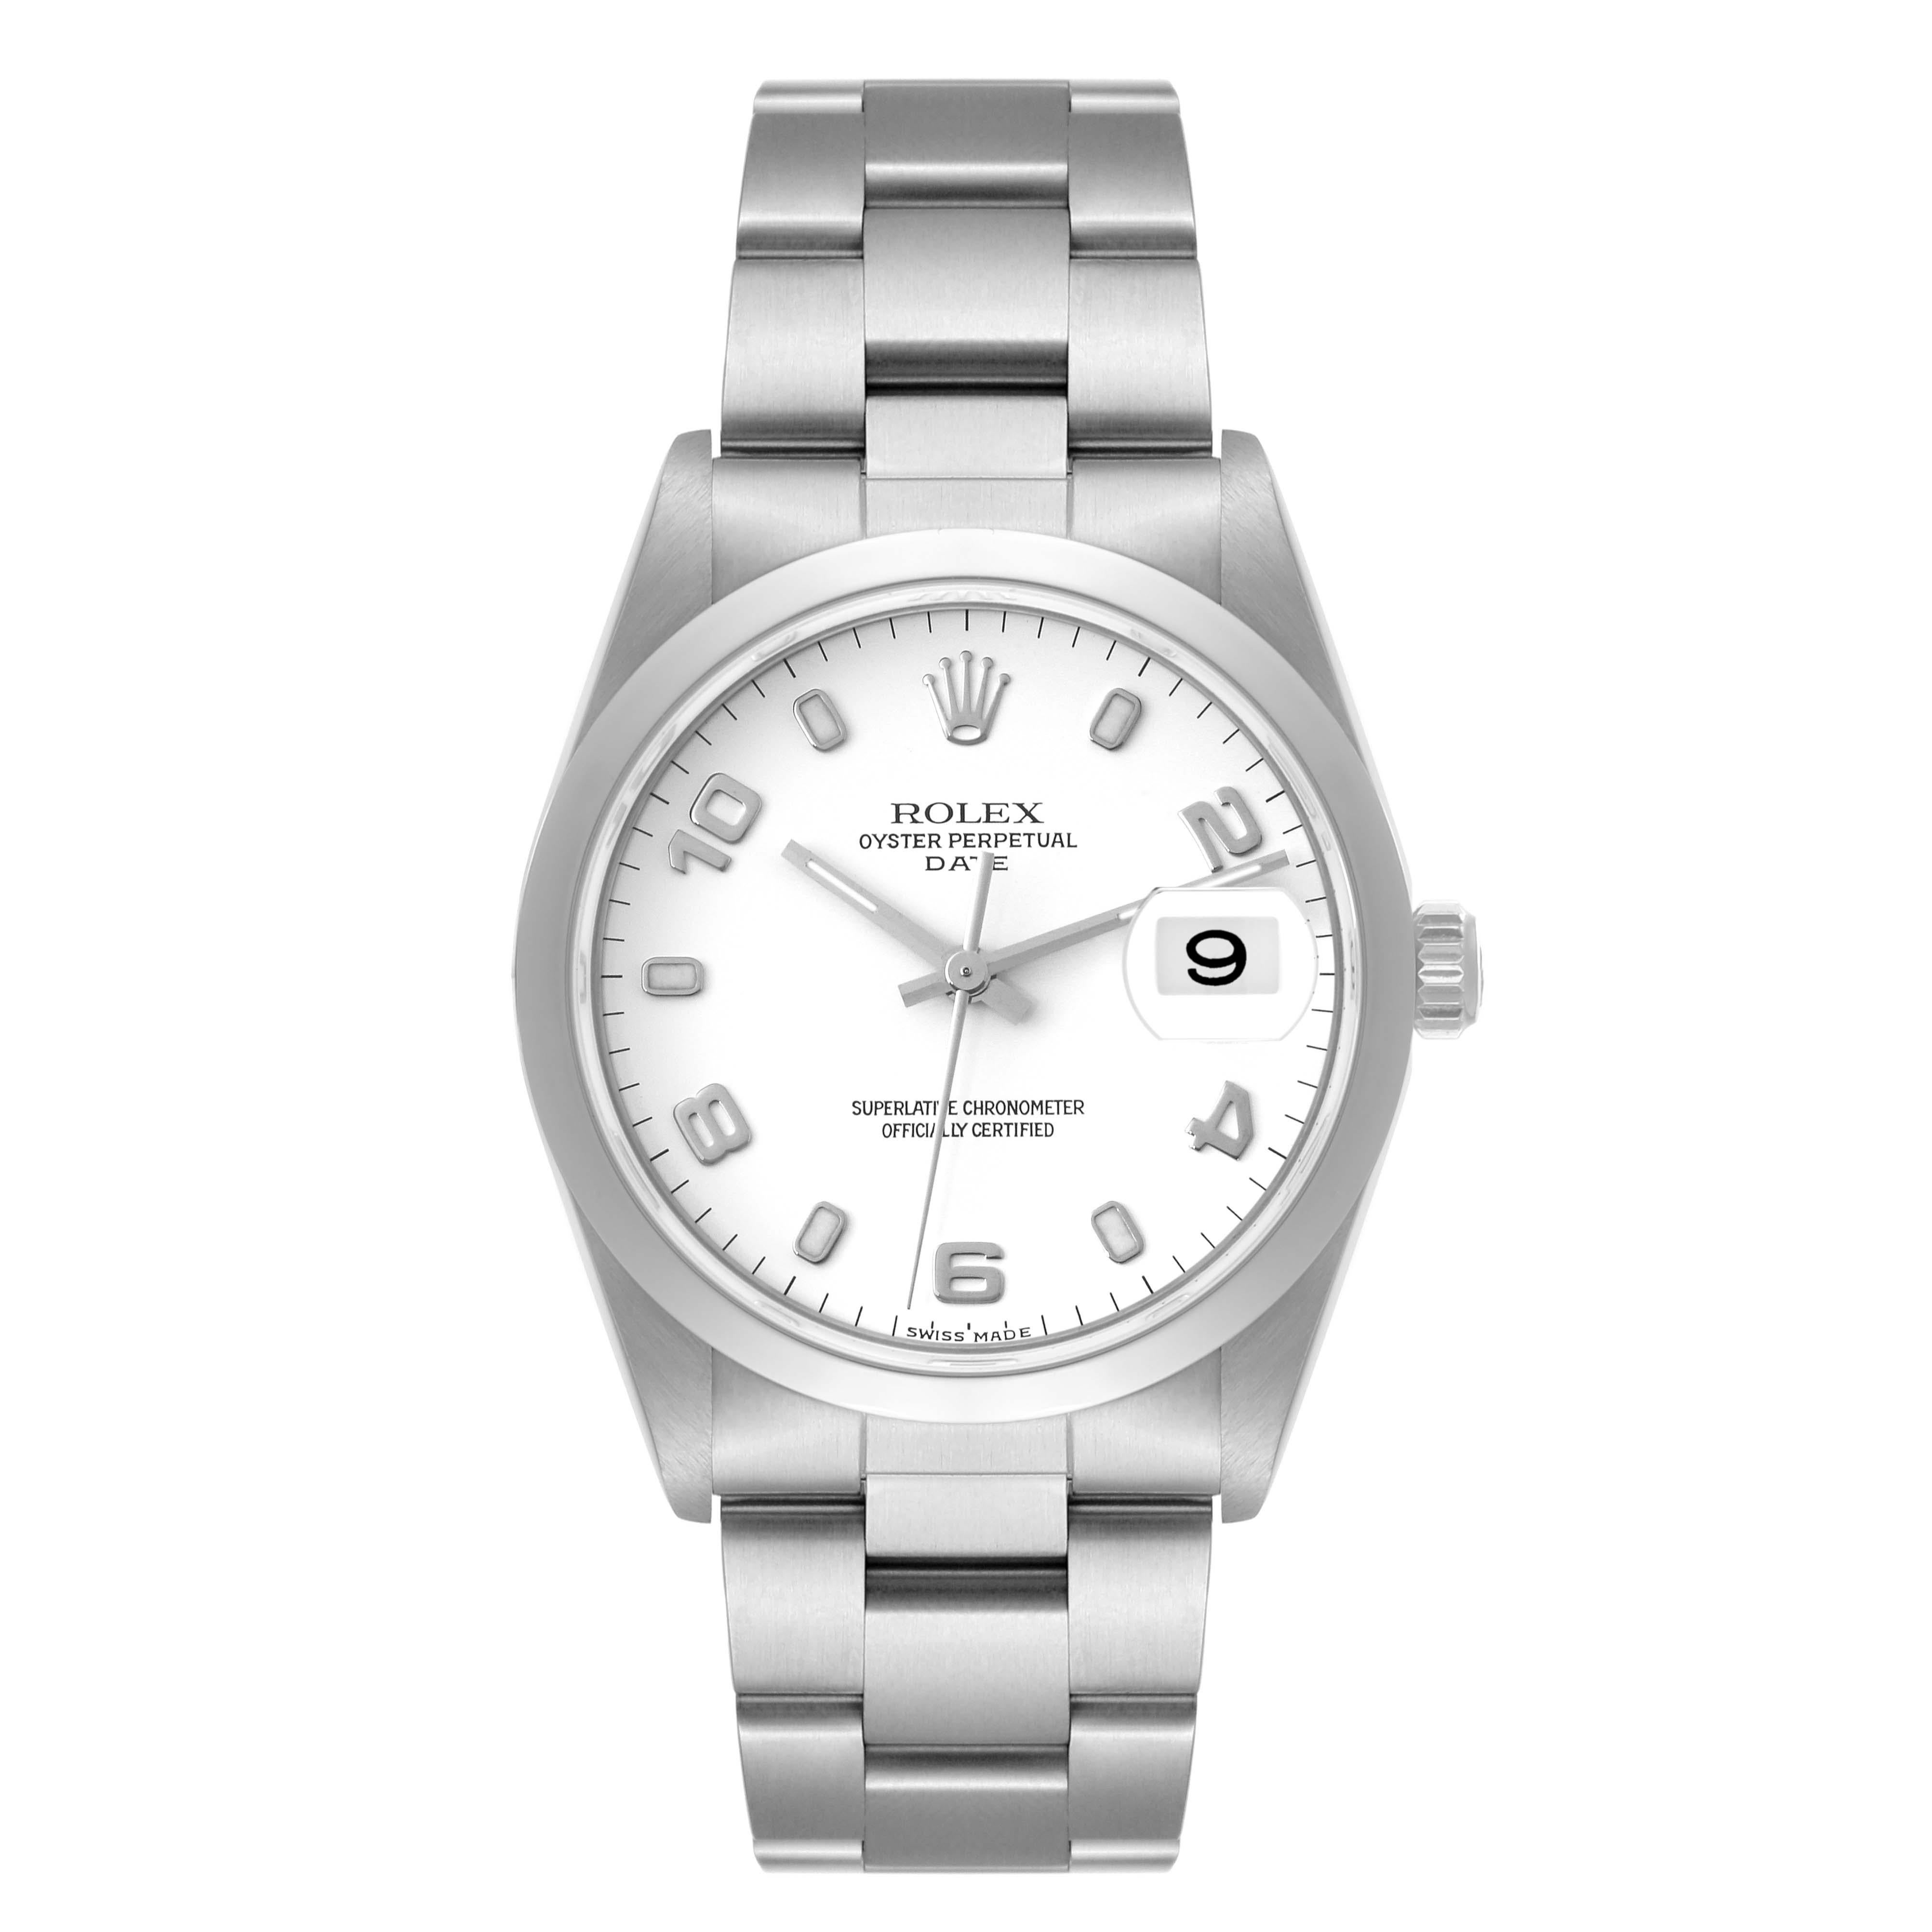 Rolex Date White Dial Oyster Bracelet Steel Mens Watch 15200 Box Papers. Officially certified chronometer self-winding movement. Stainless steel oyster case 34.0 mm in diameter. Rolex logo on the crown. Stainless steel smooth bezel. Scratch